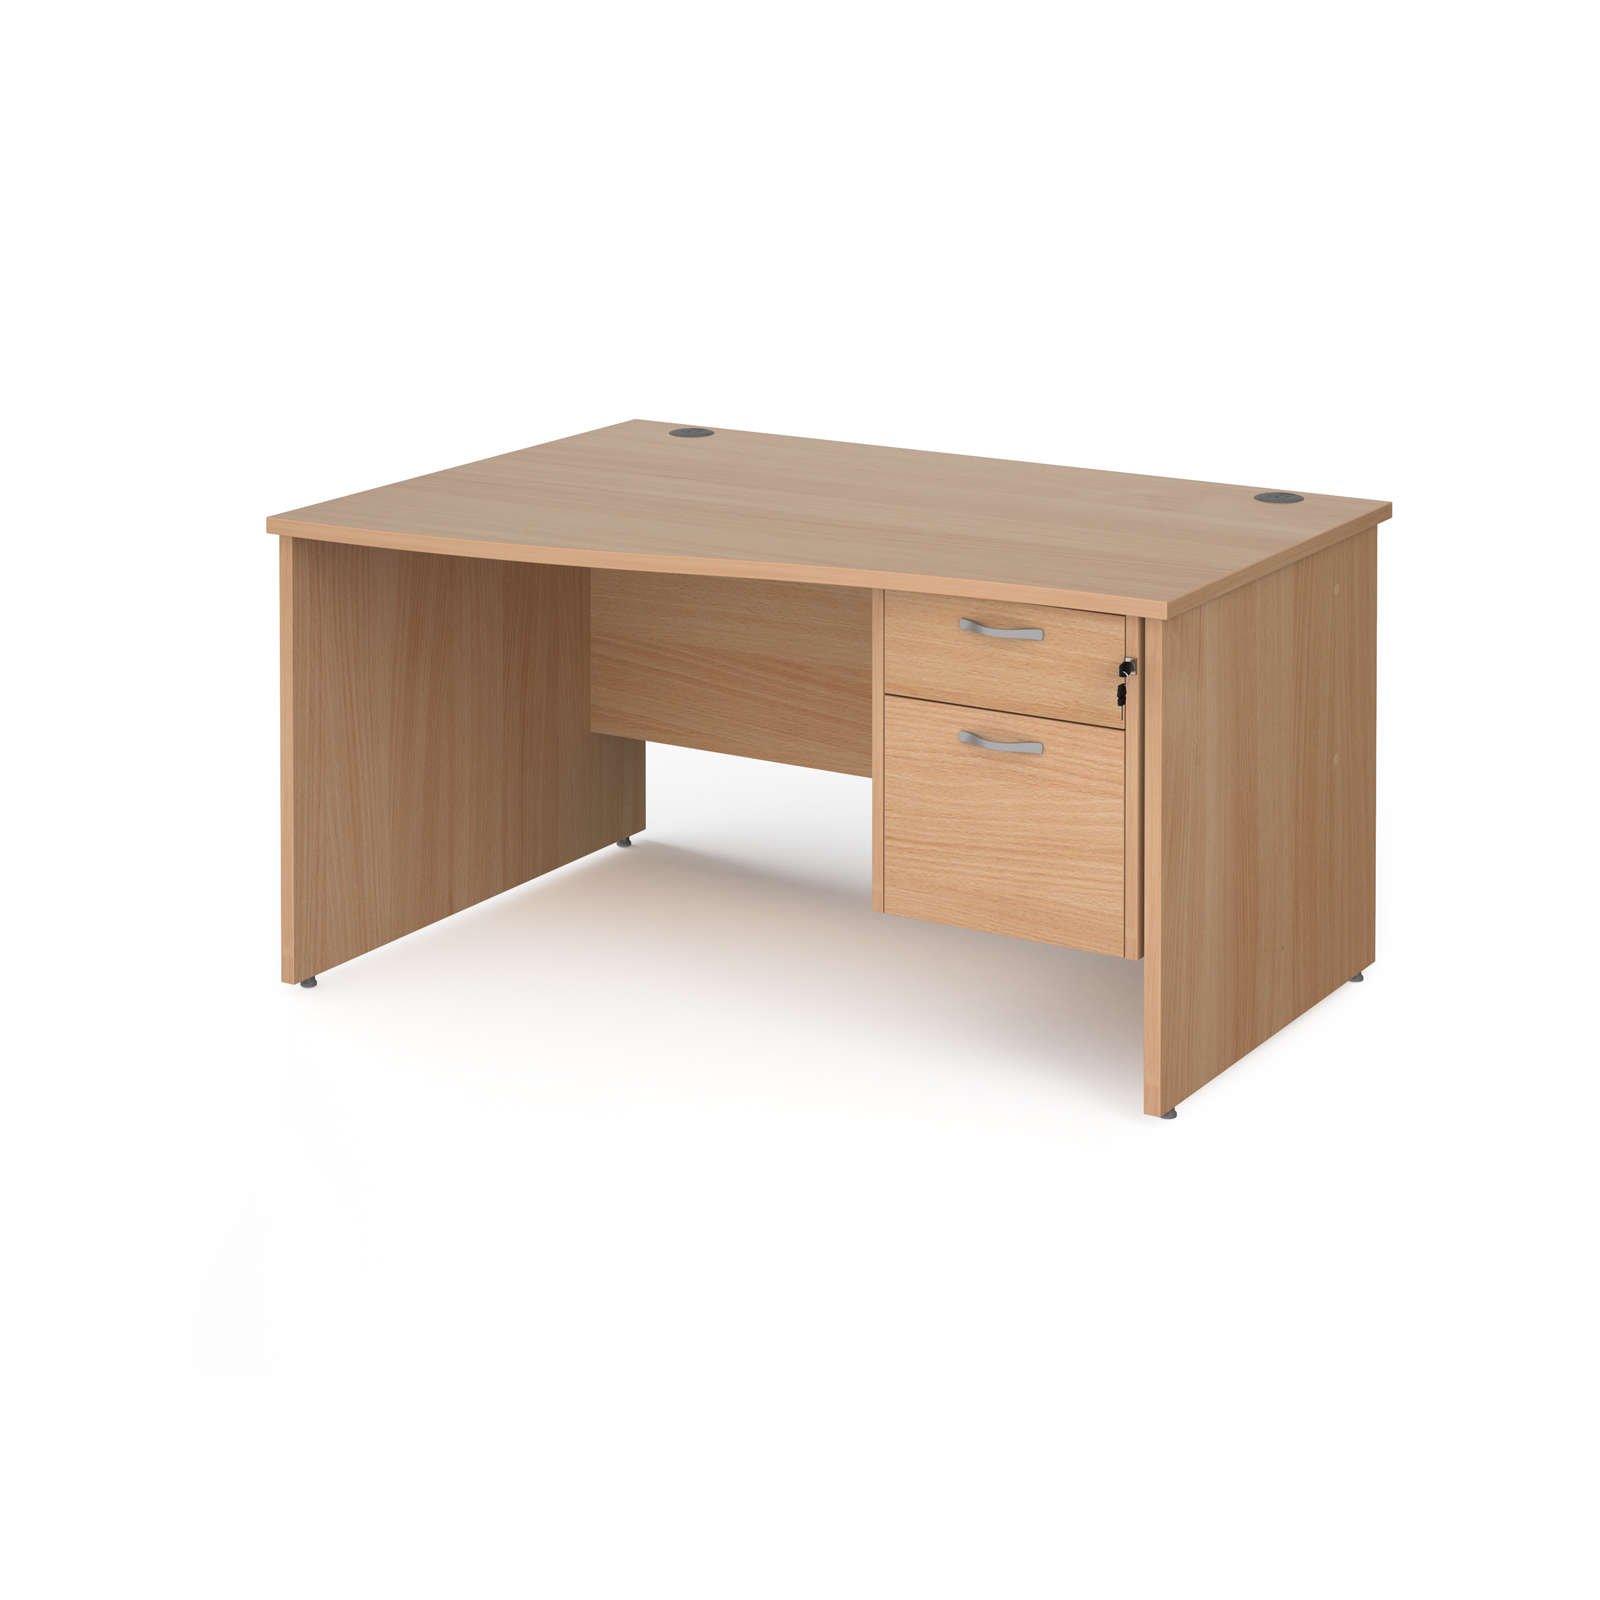 Maestro 25 left hand wave desk 1400mm wide with 2 drawer pedestal - beech top with panel end leg